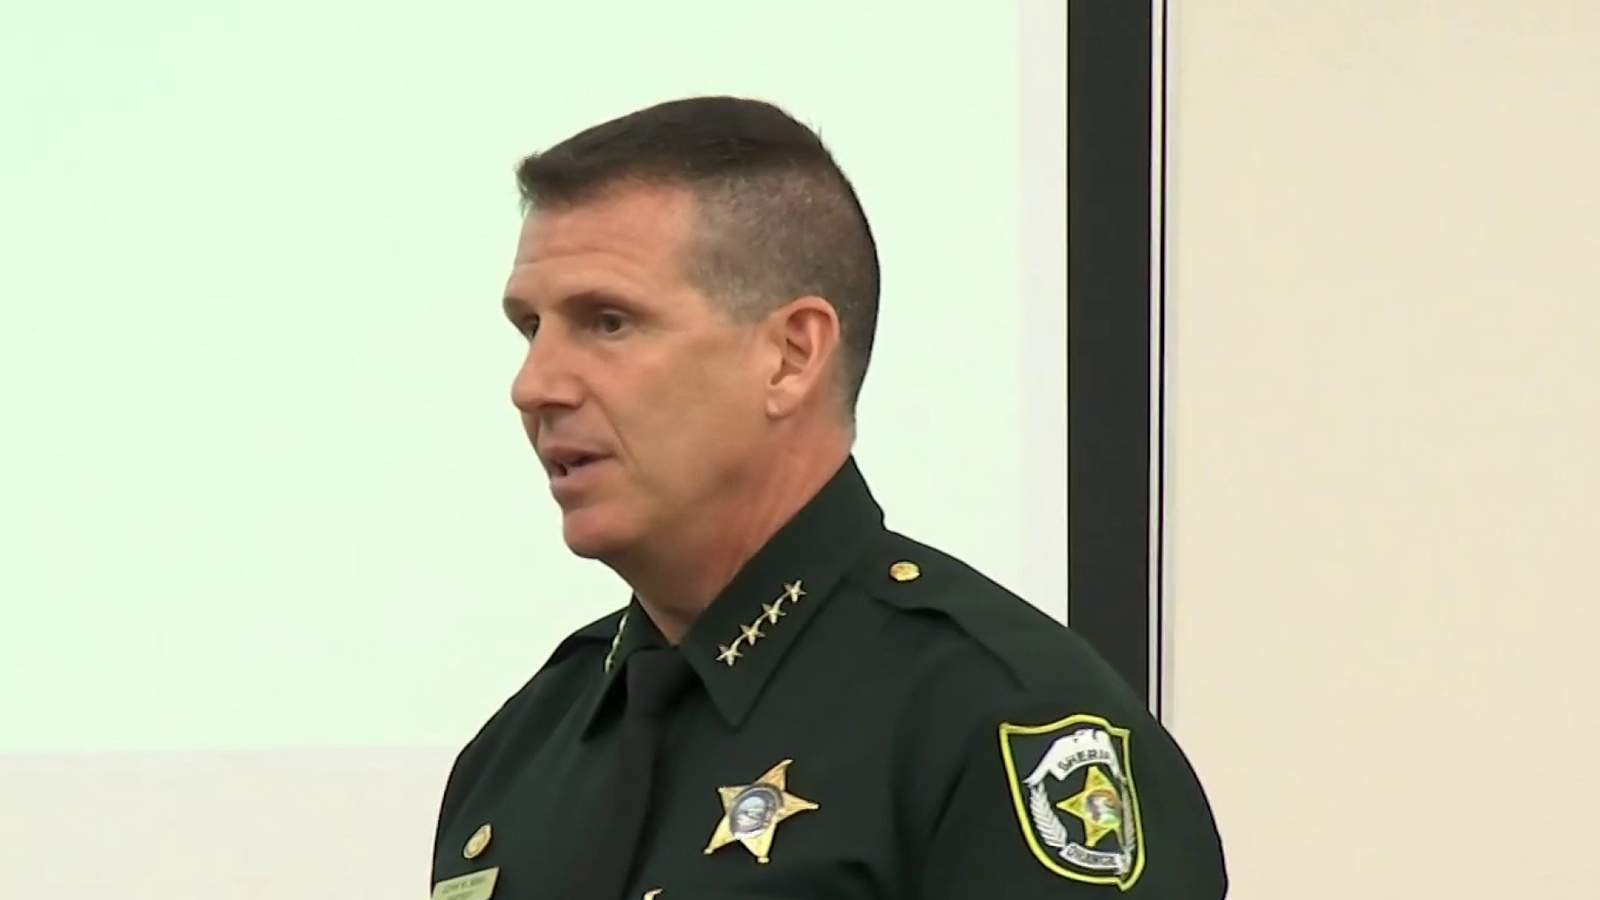 Use of force policy update: Orange County deputies now have ‘duty to intervene’